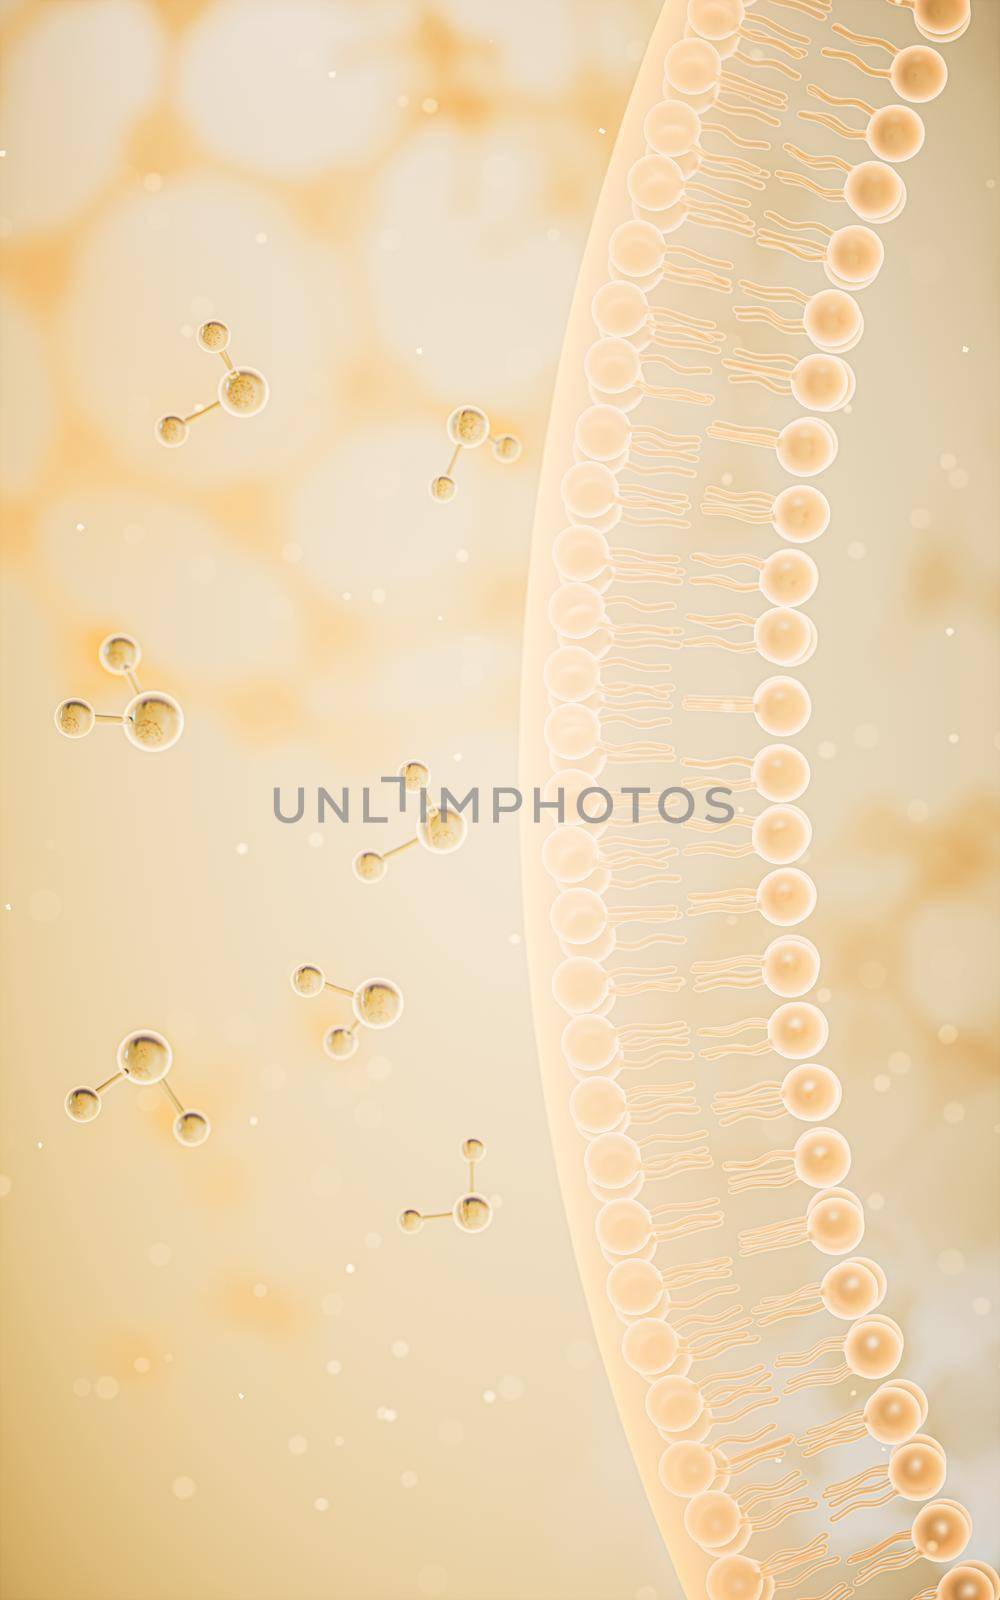 Cell membrane with yellow background, 3d rendering. Computer digital drawing.